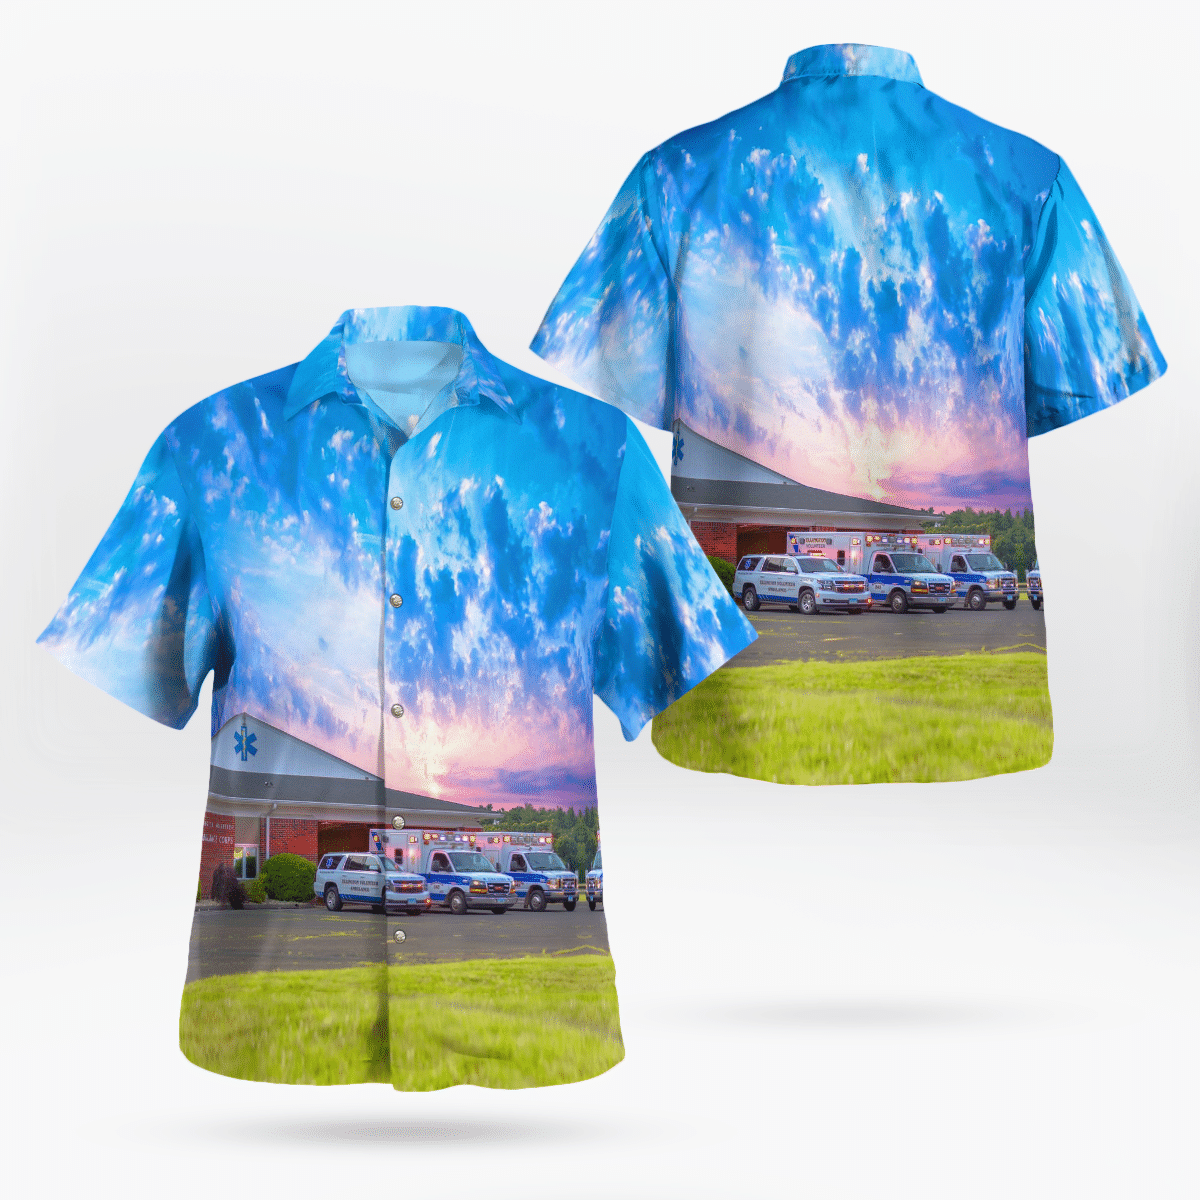 Shop now to find the perfect Hawaii Shirt for your hobby 154